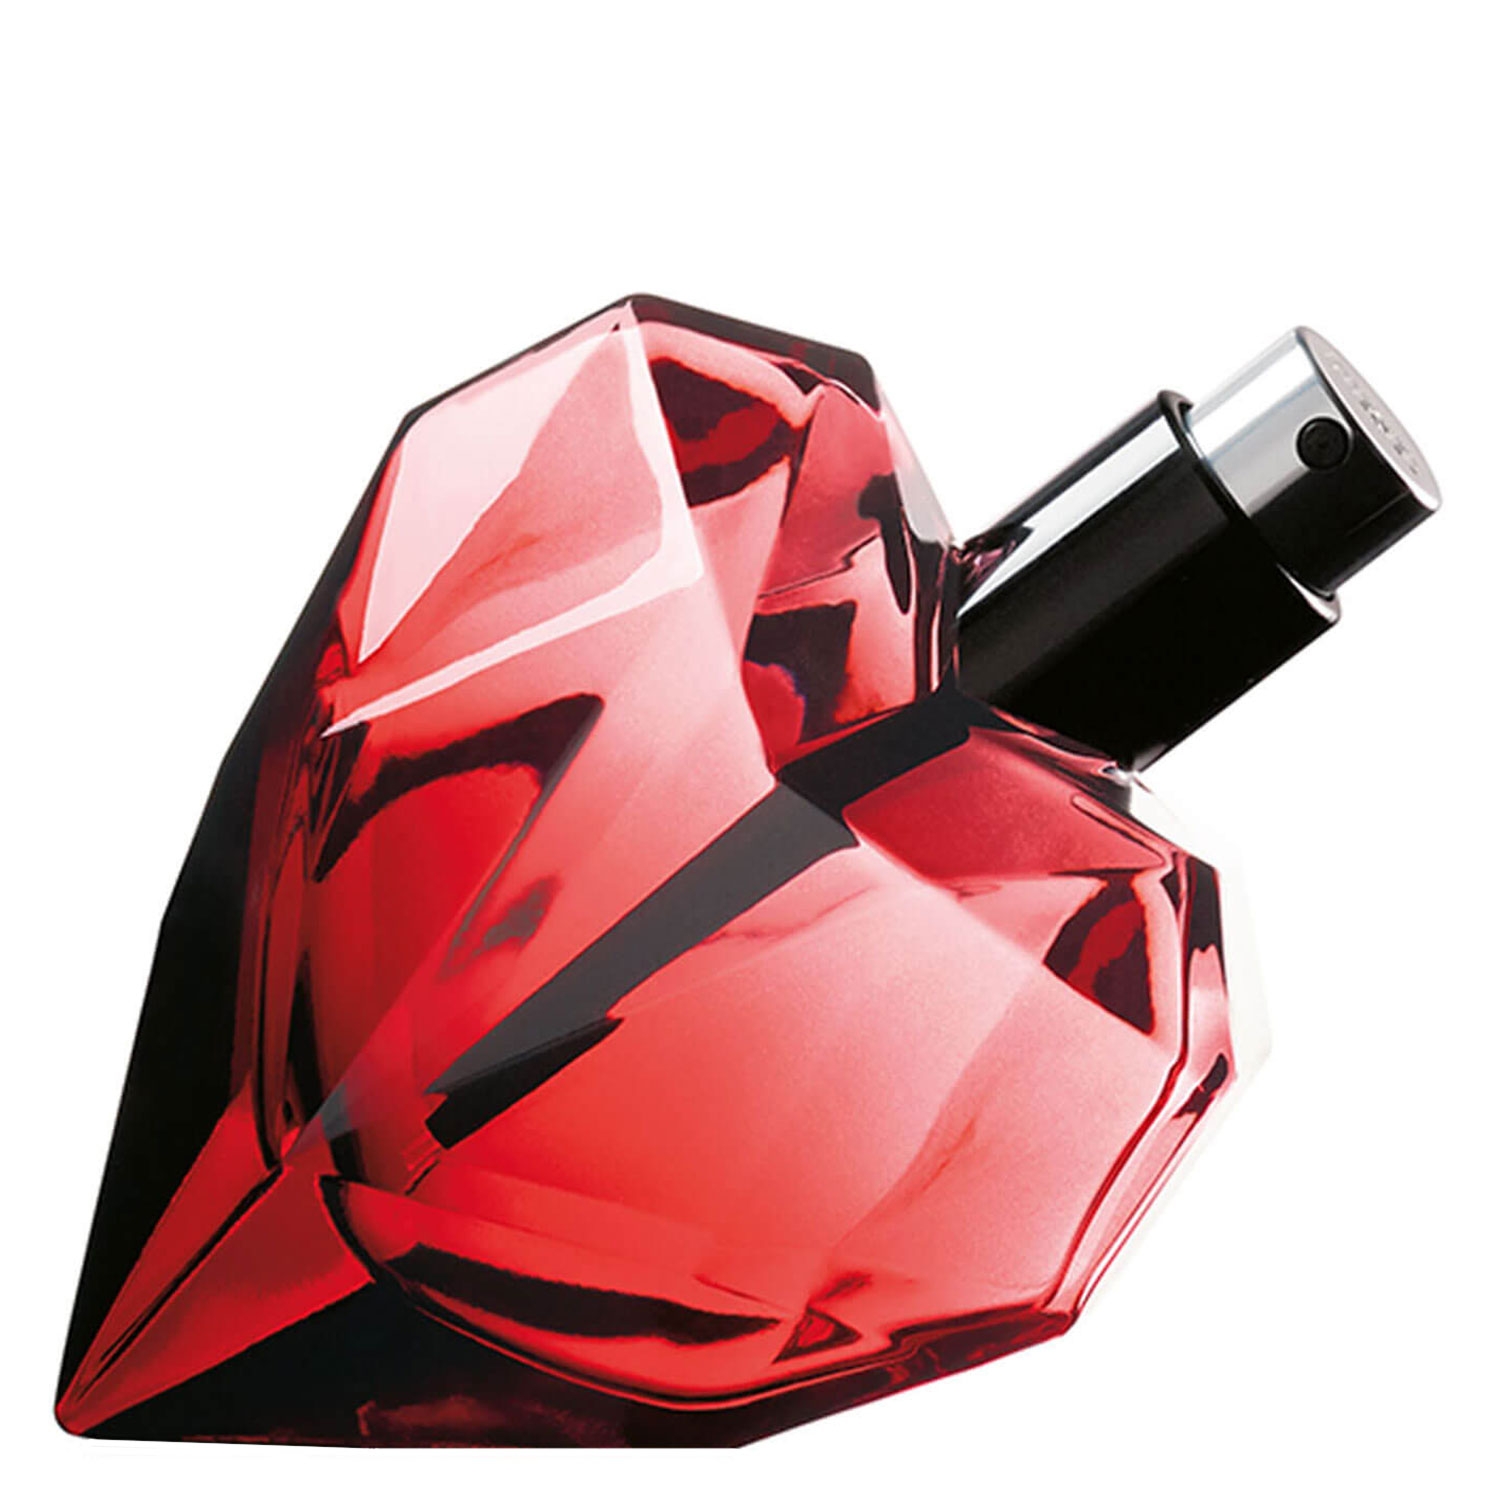 Product image from Loverdose - Loverdose Red Kiss EdP